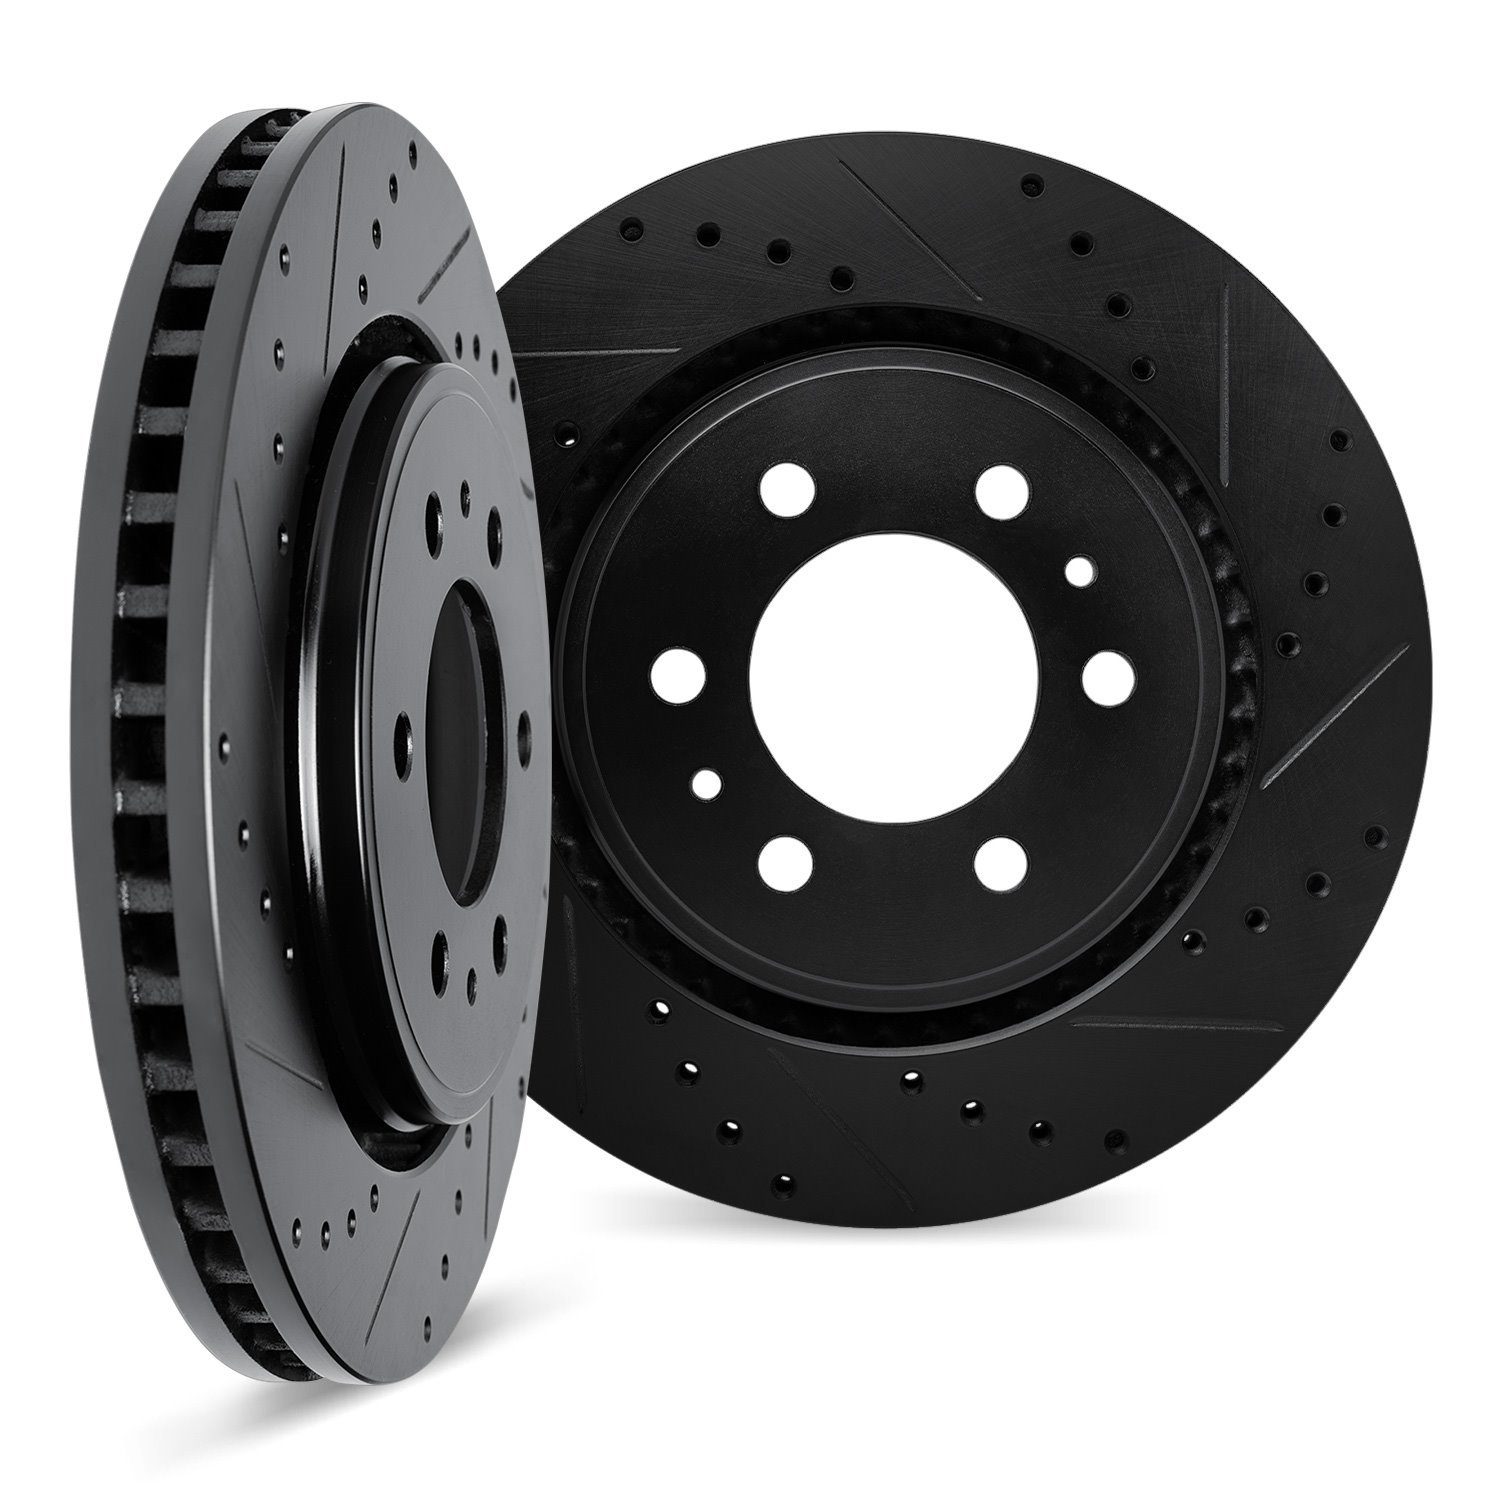 8002-54255 Drilled/Slotted Brake Rotors [Black], Fits Select Ford/Lincoln/Mercury/Mazda, Position: Front